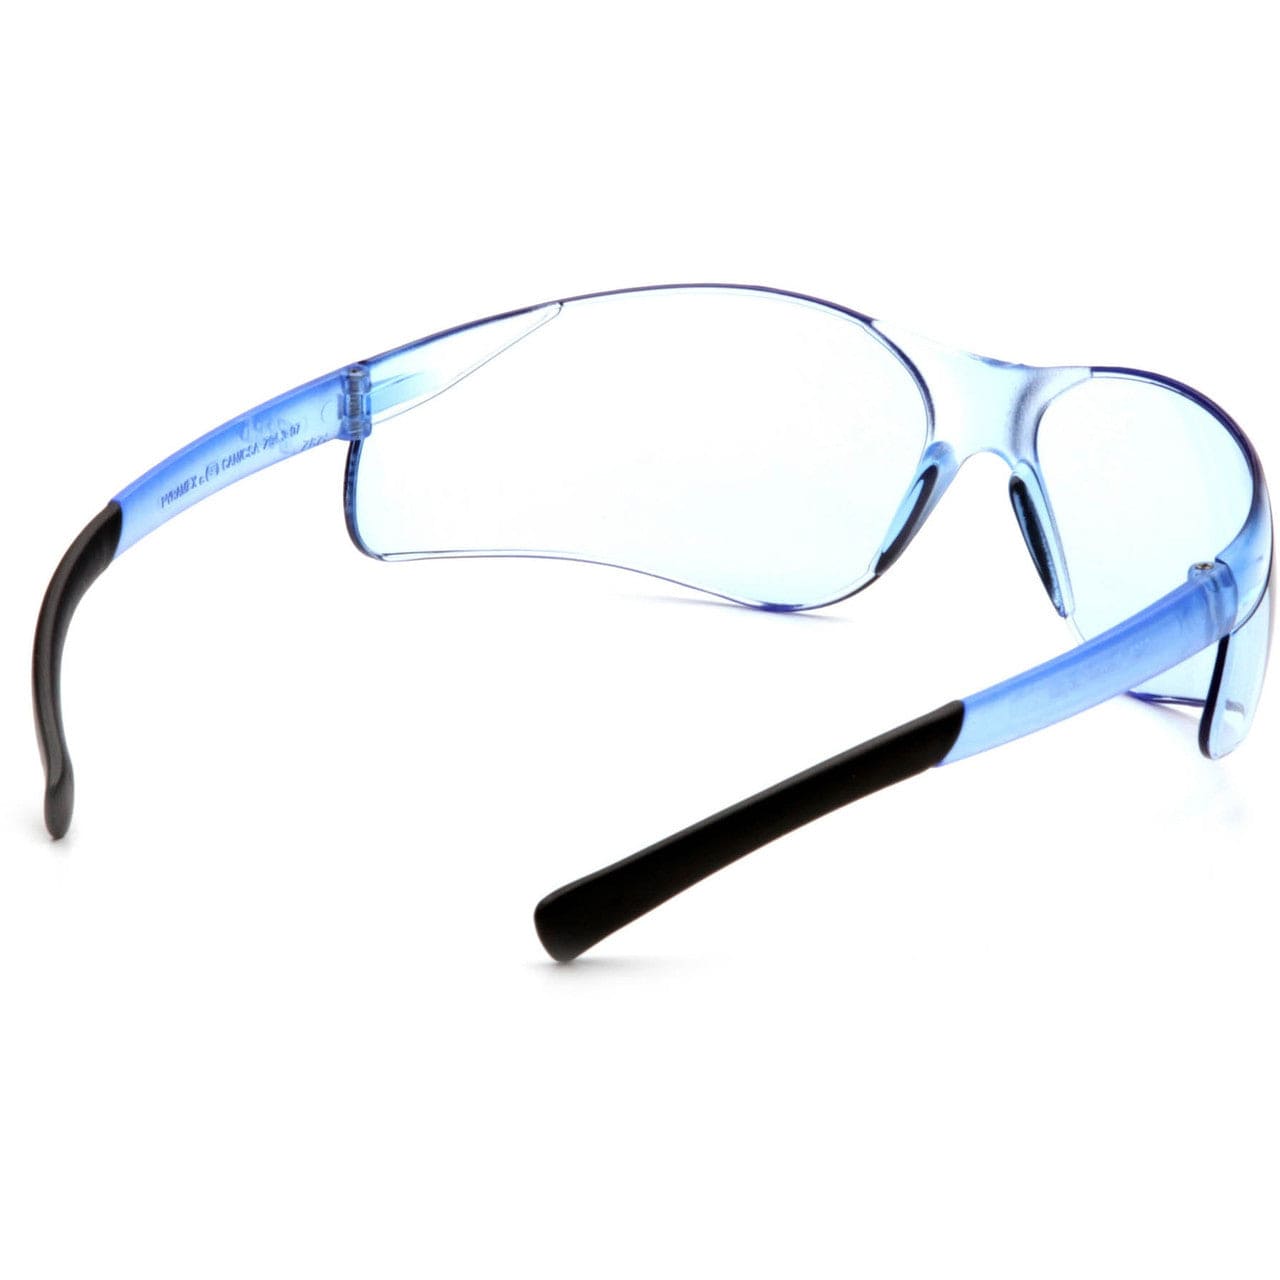 Pyramex Ztek Safety Glasses with Infinity Blue Anti-Fog Lens S2560ST Inside View